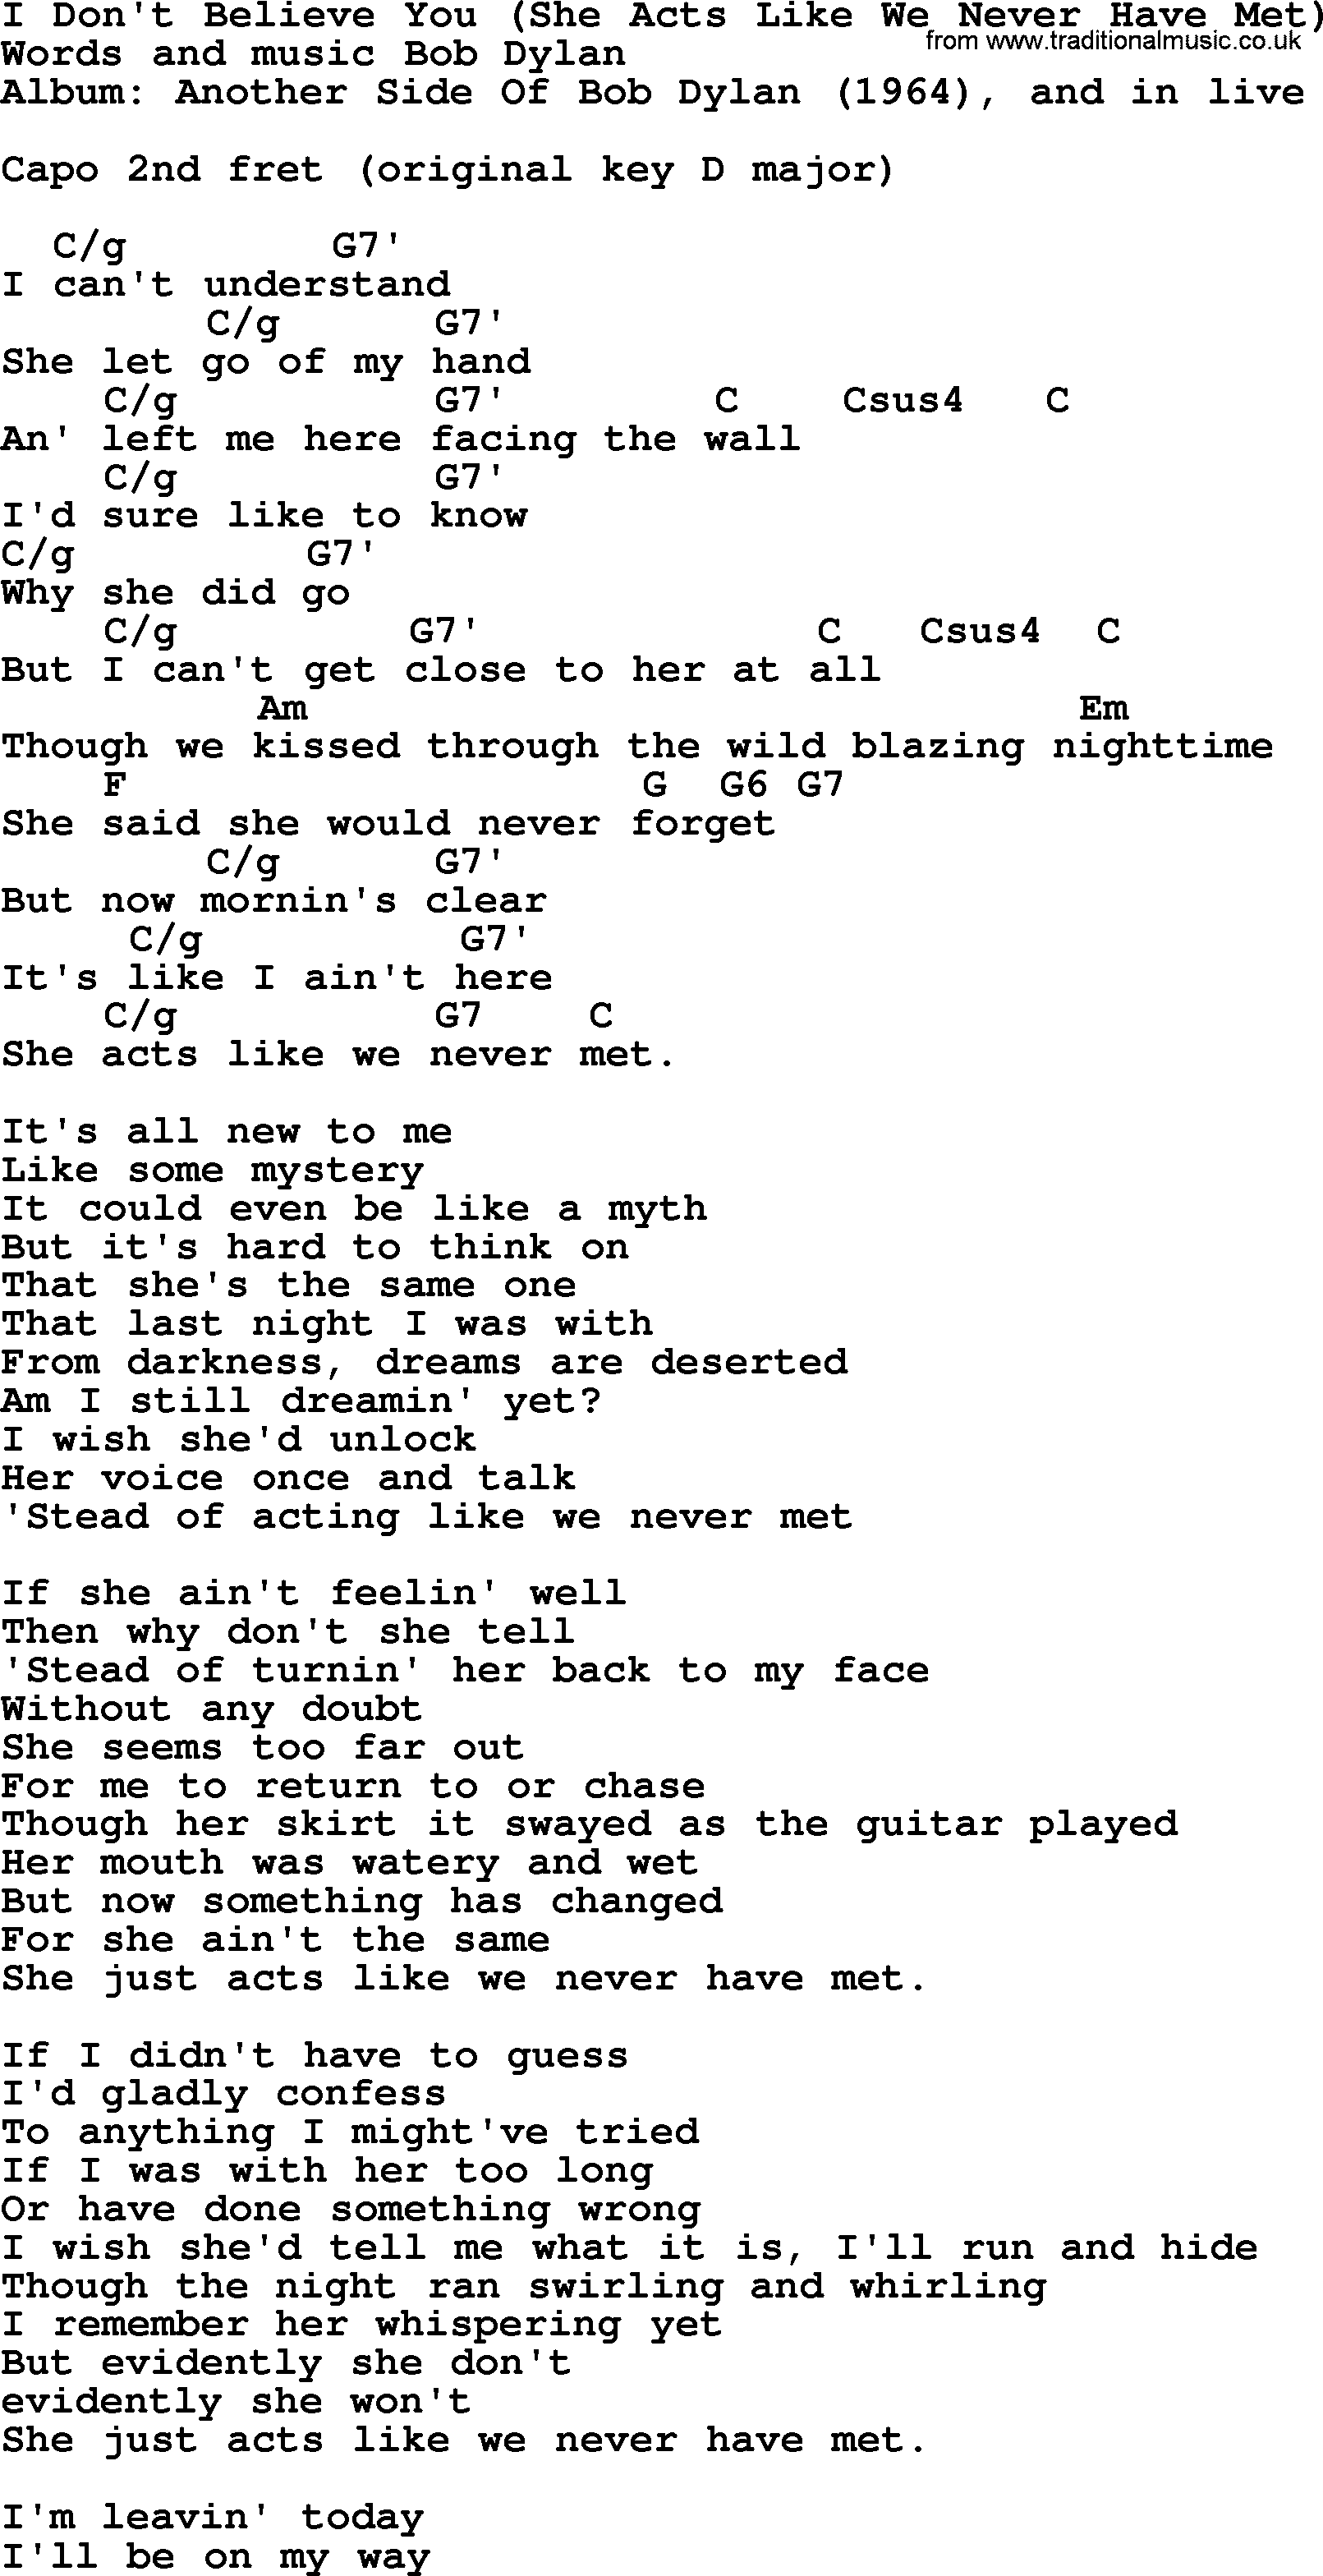 Bob Dylan song, lyrics with chords - I Don't Believe You (She Acts Like We Never Have Met)